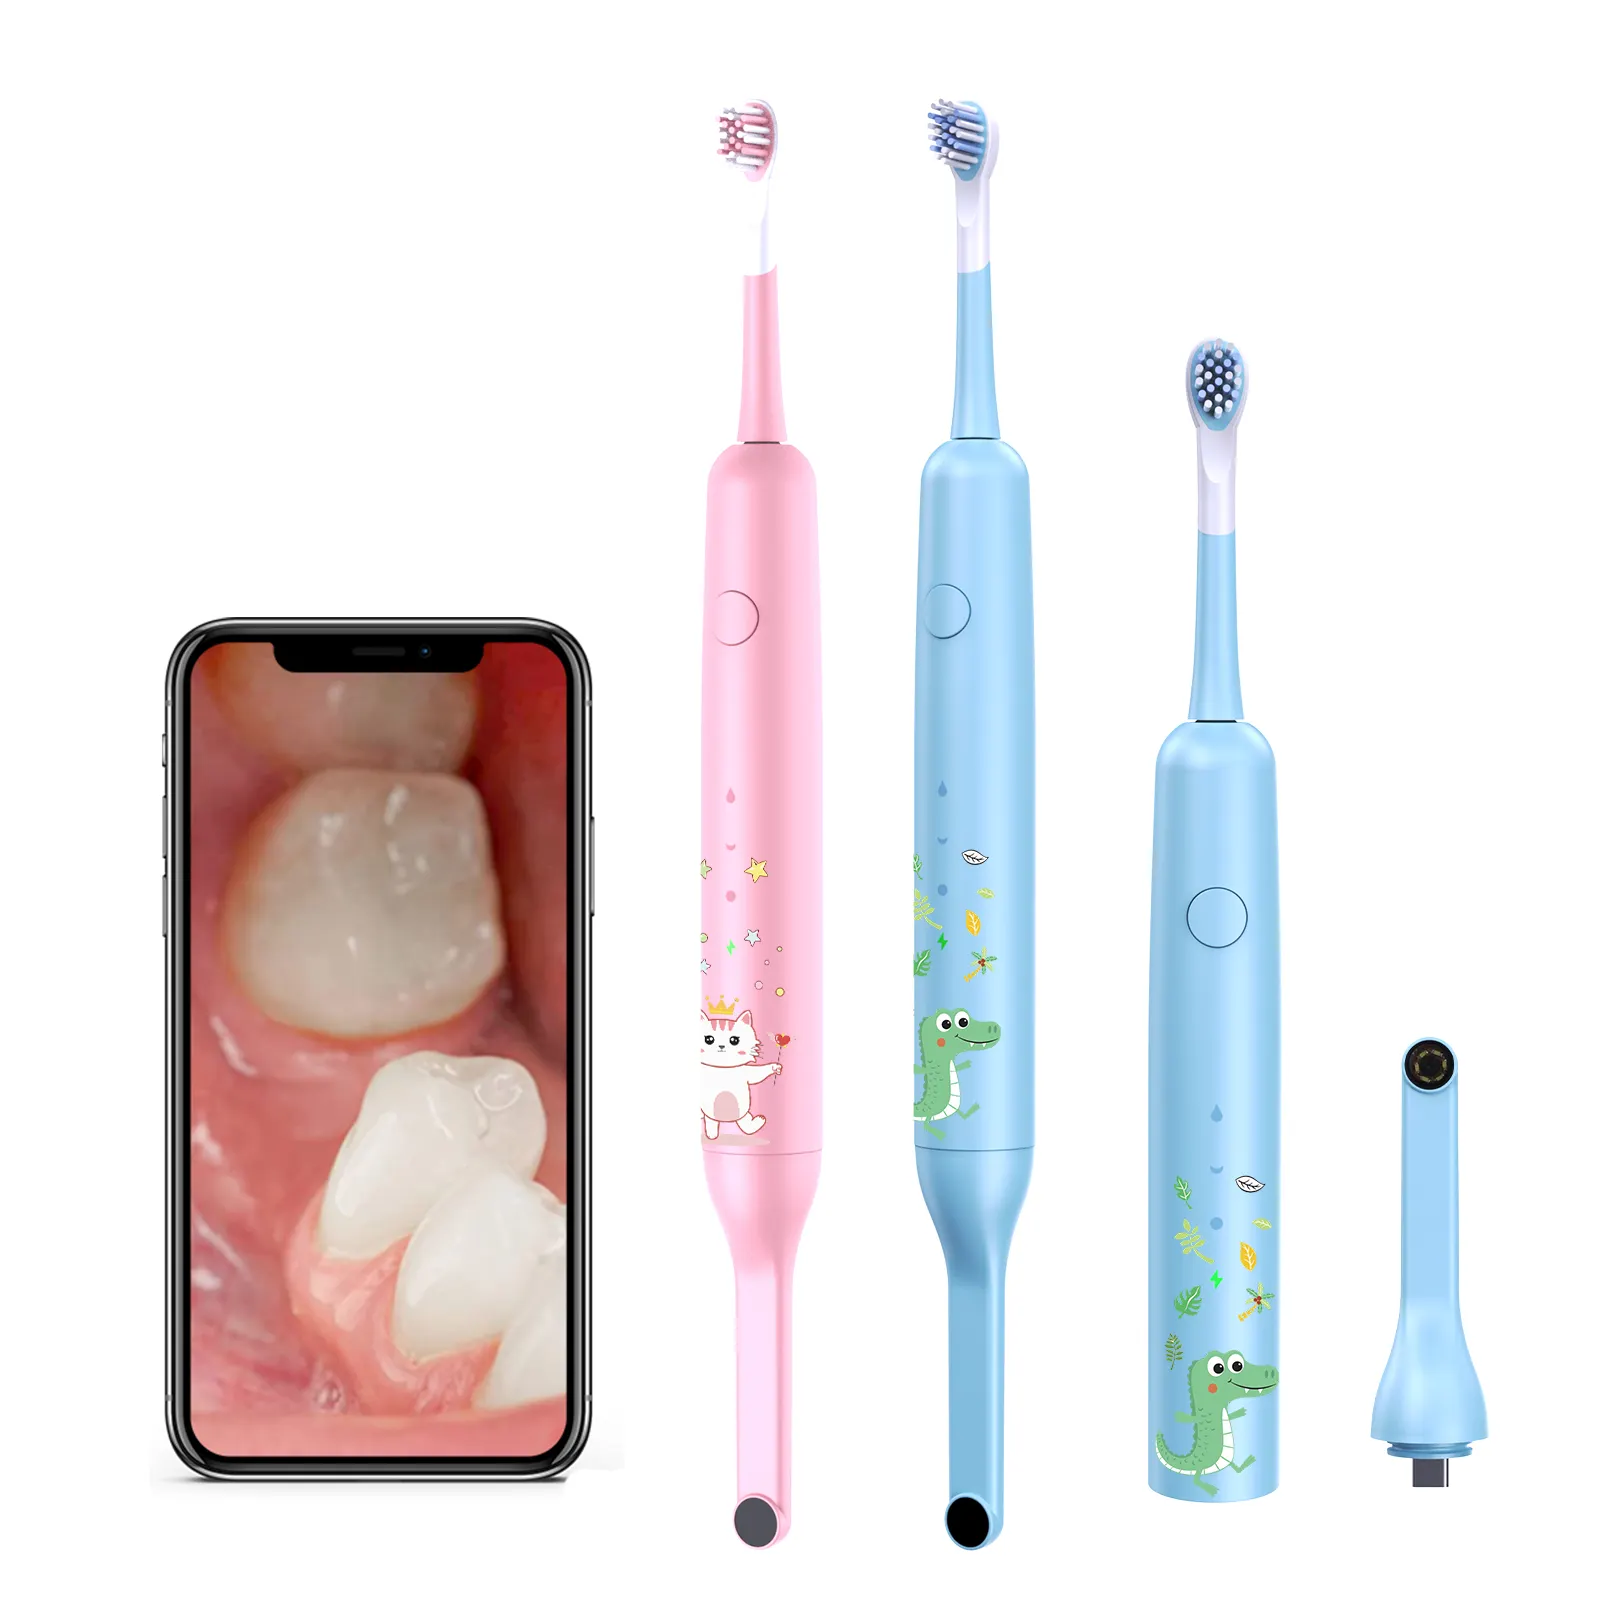 OEM ODM Support Kids Cute Cartoon Sonic Electric Toothbrush Rechargeable Baby Smart Toothbrush with Camera